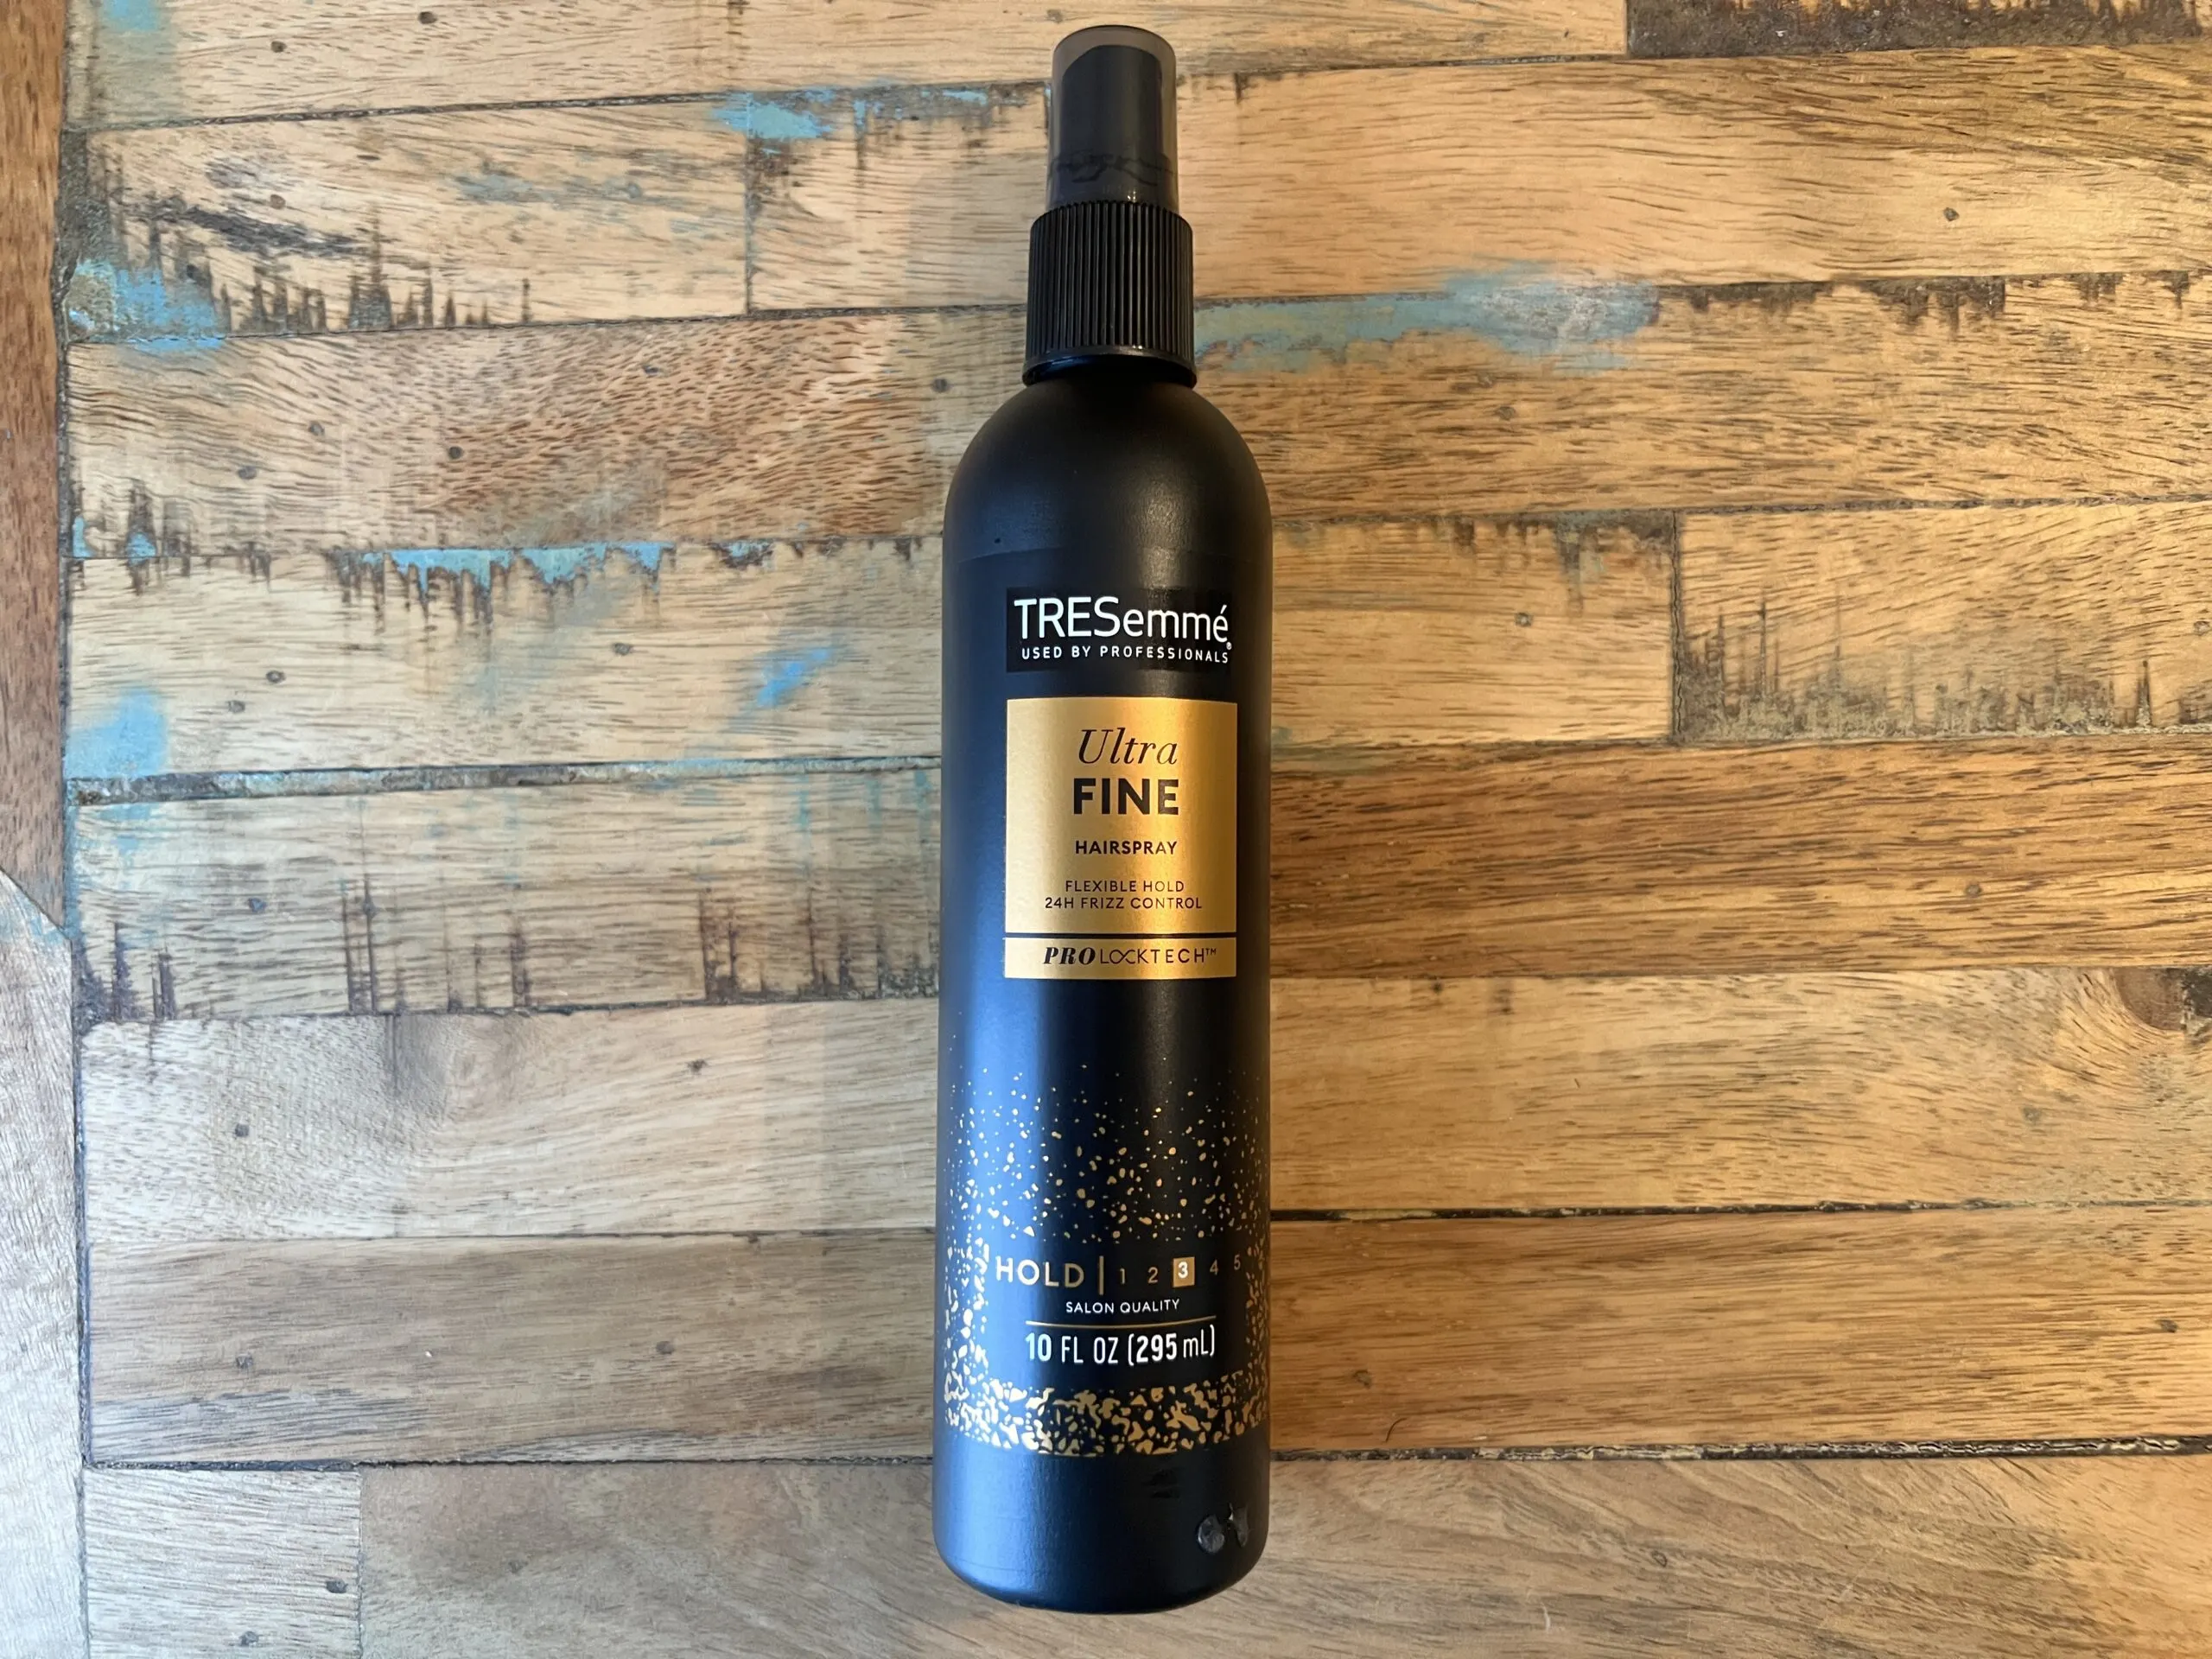 TRESemmé Used by Professionals - Ultra Fine Hairspray with flexible hold.